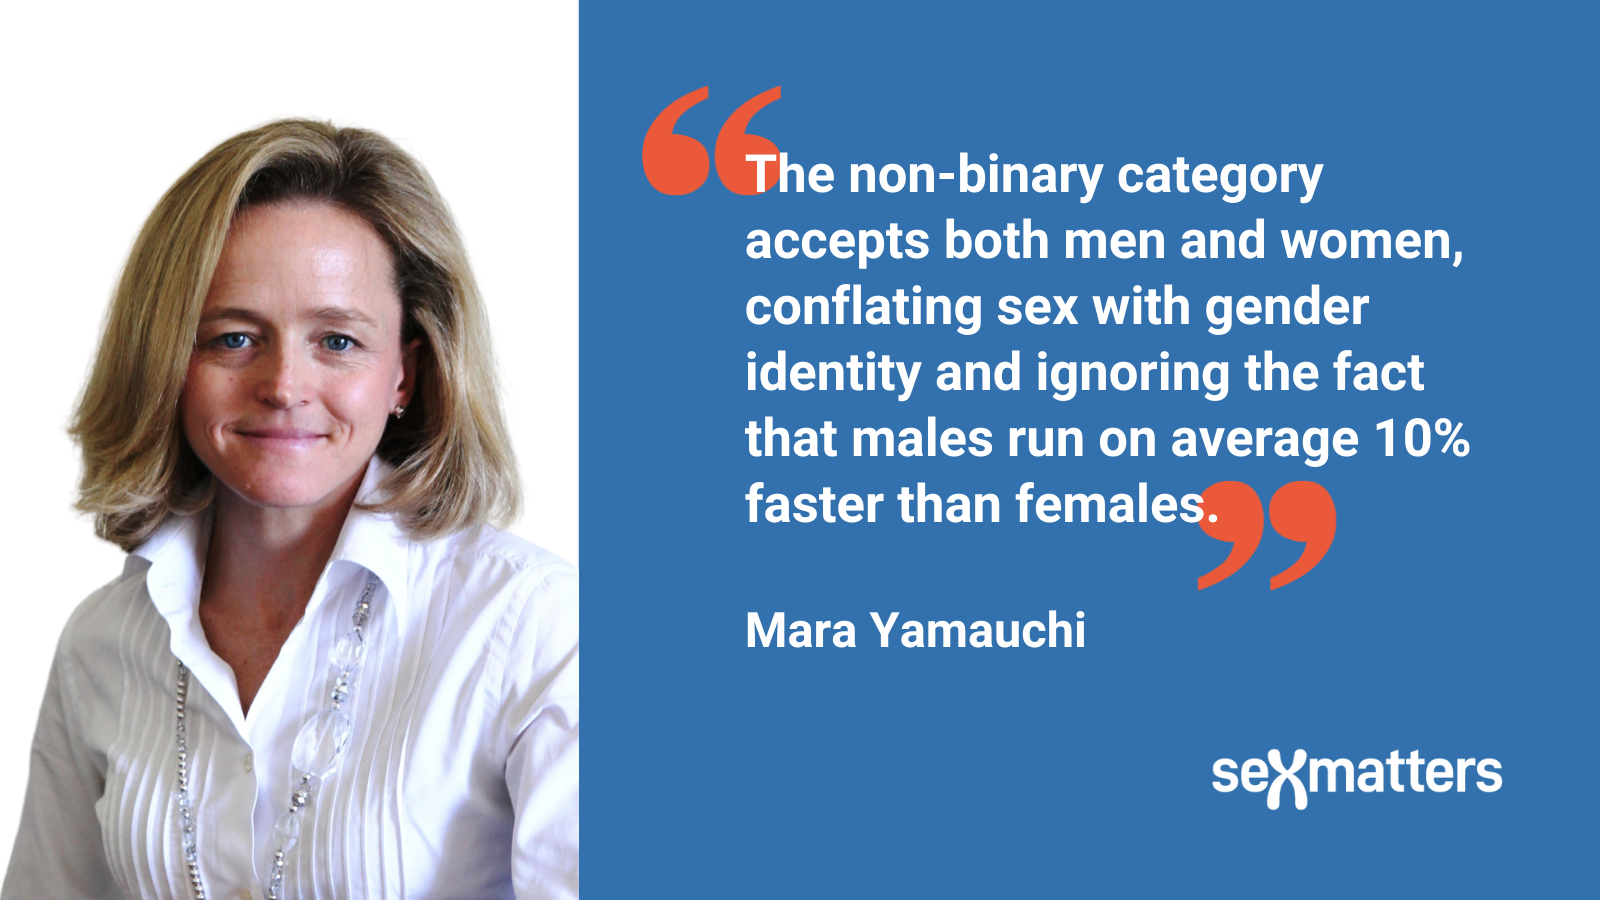 The non-binary category accepts both men and women, conflating sex with gender identity and ignoring the fact that males run on average 10% faster than females.